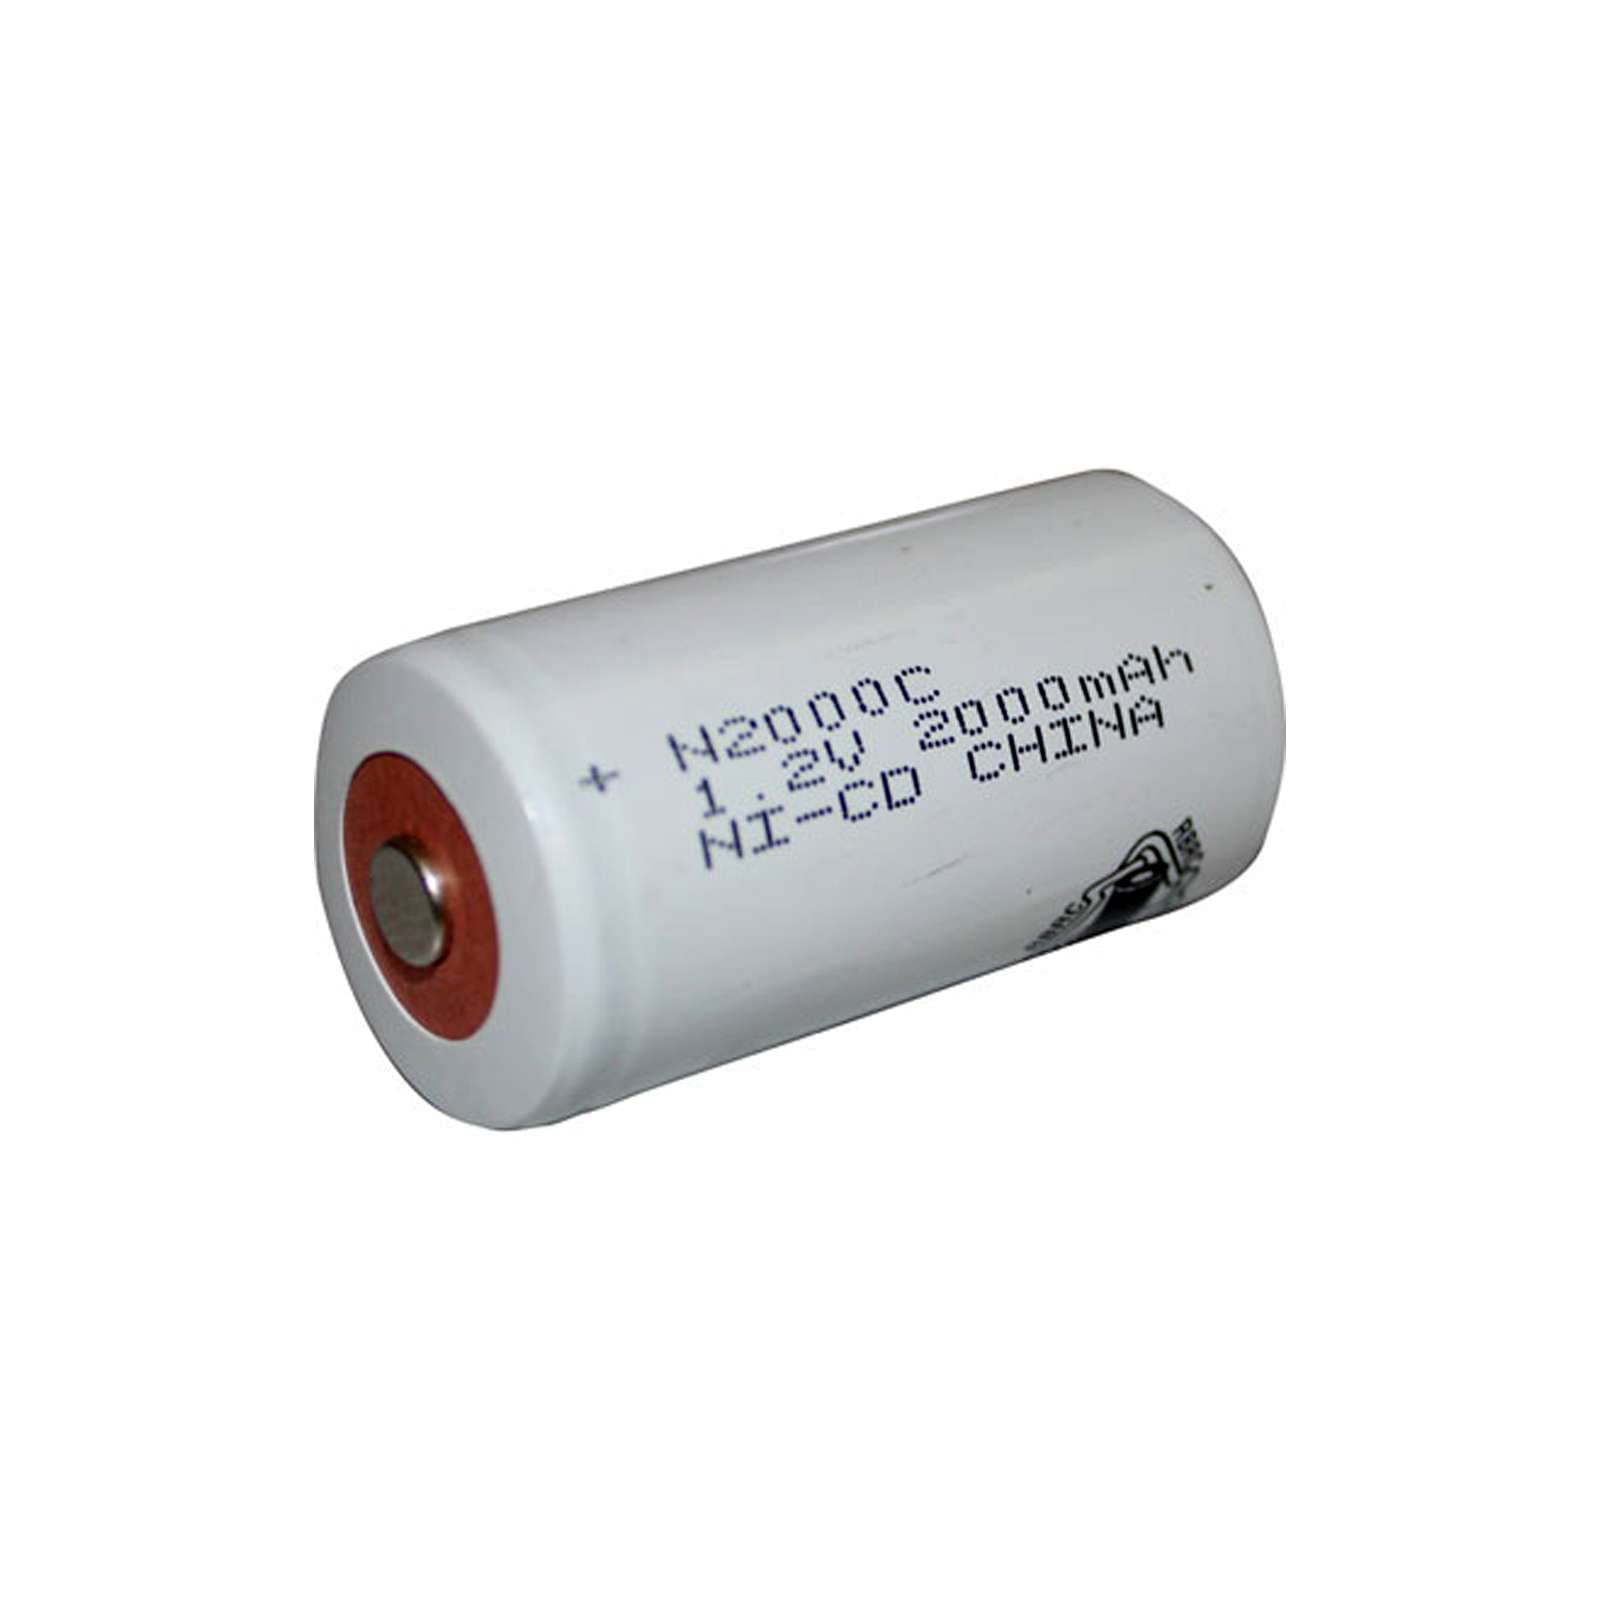 Exell SubC 1.2V 2000mAh NiCD Button Top Rechargeable Battery 